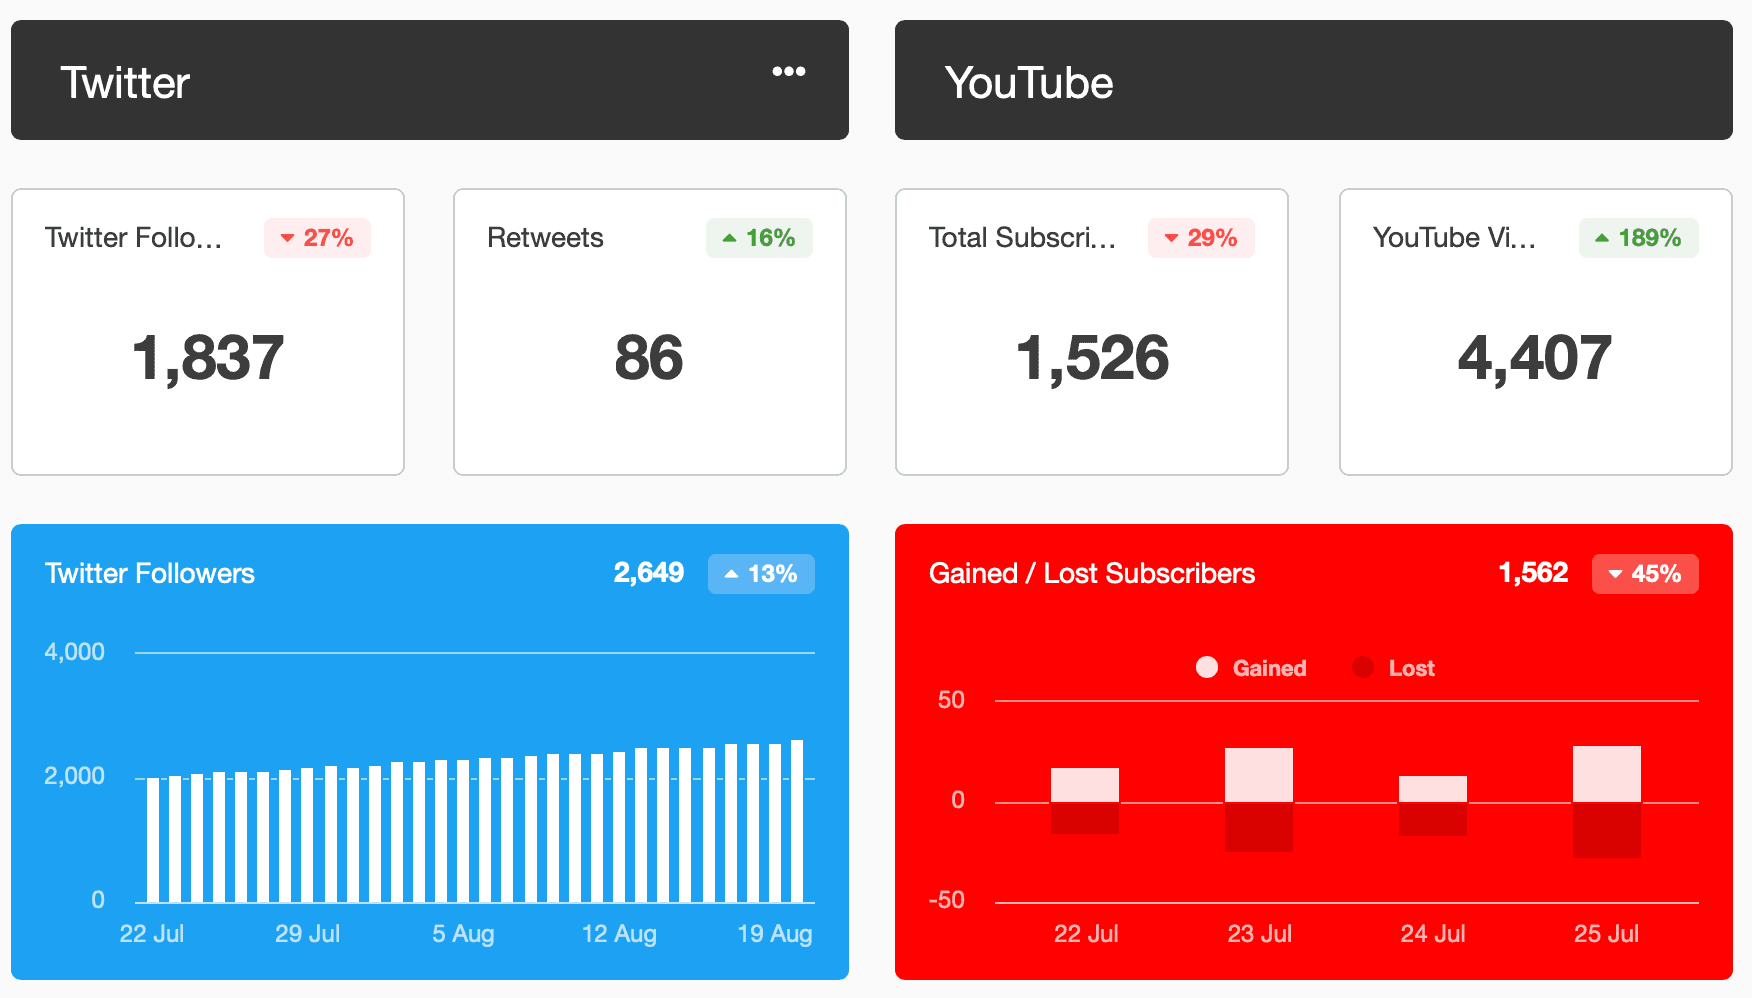 Twitter followers and retweets, and YouTube subscribers report